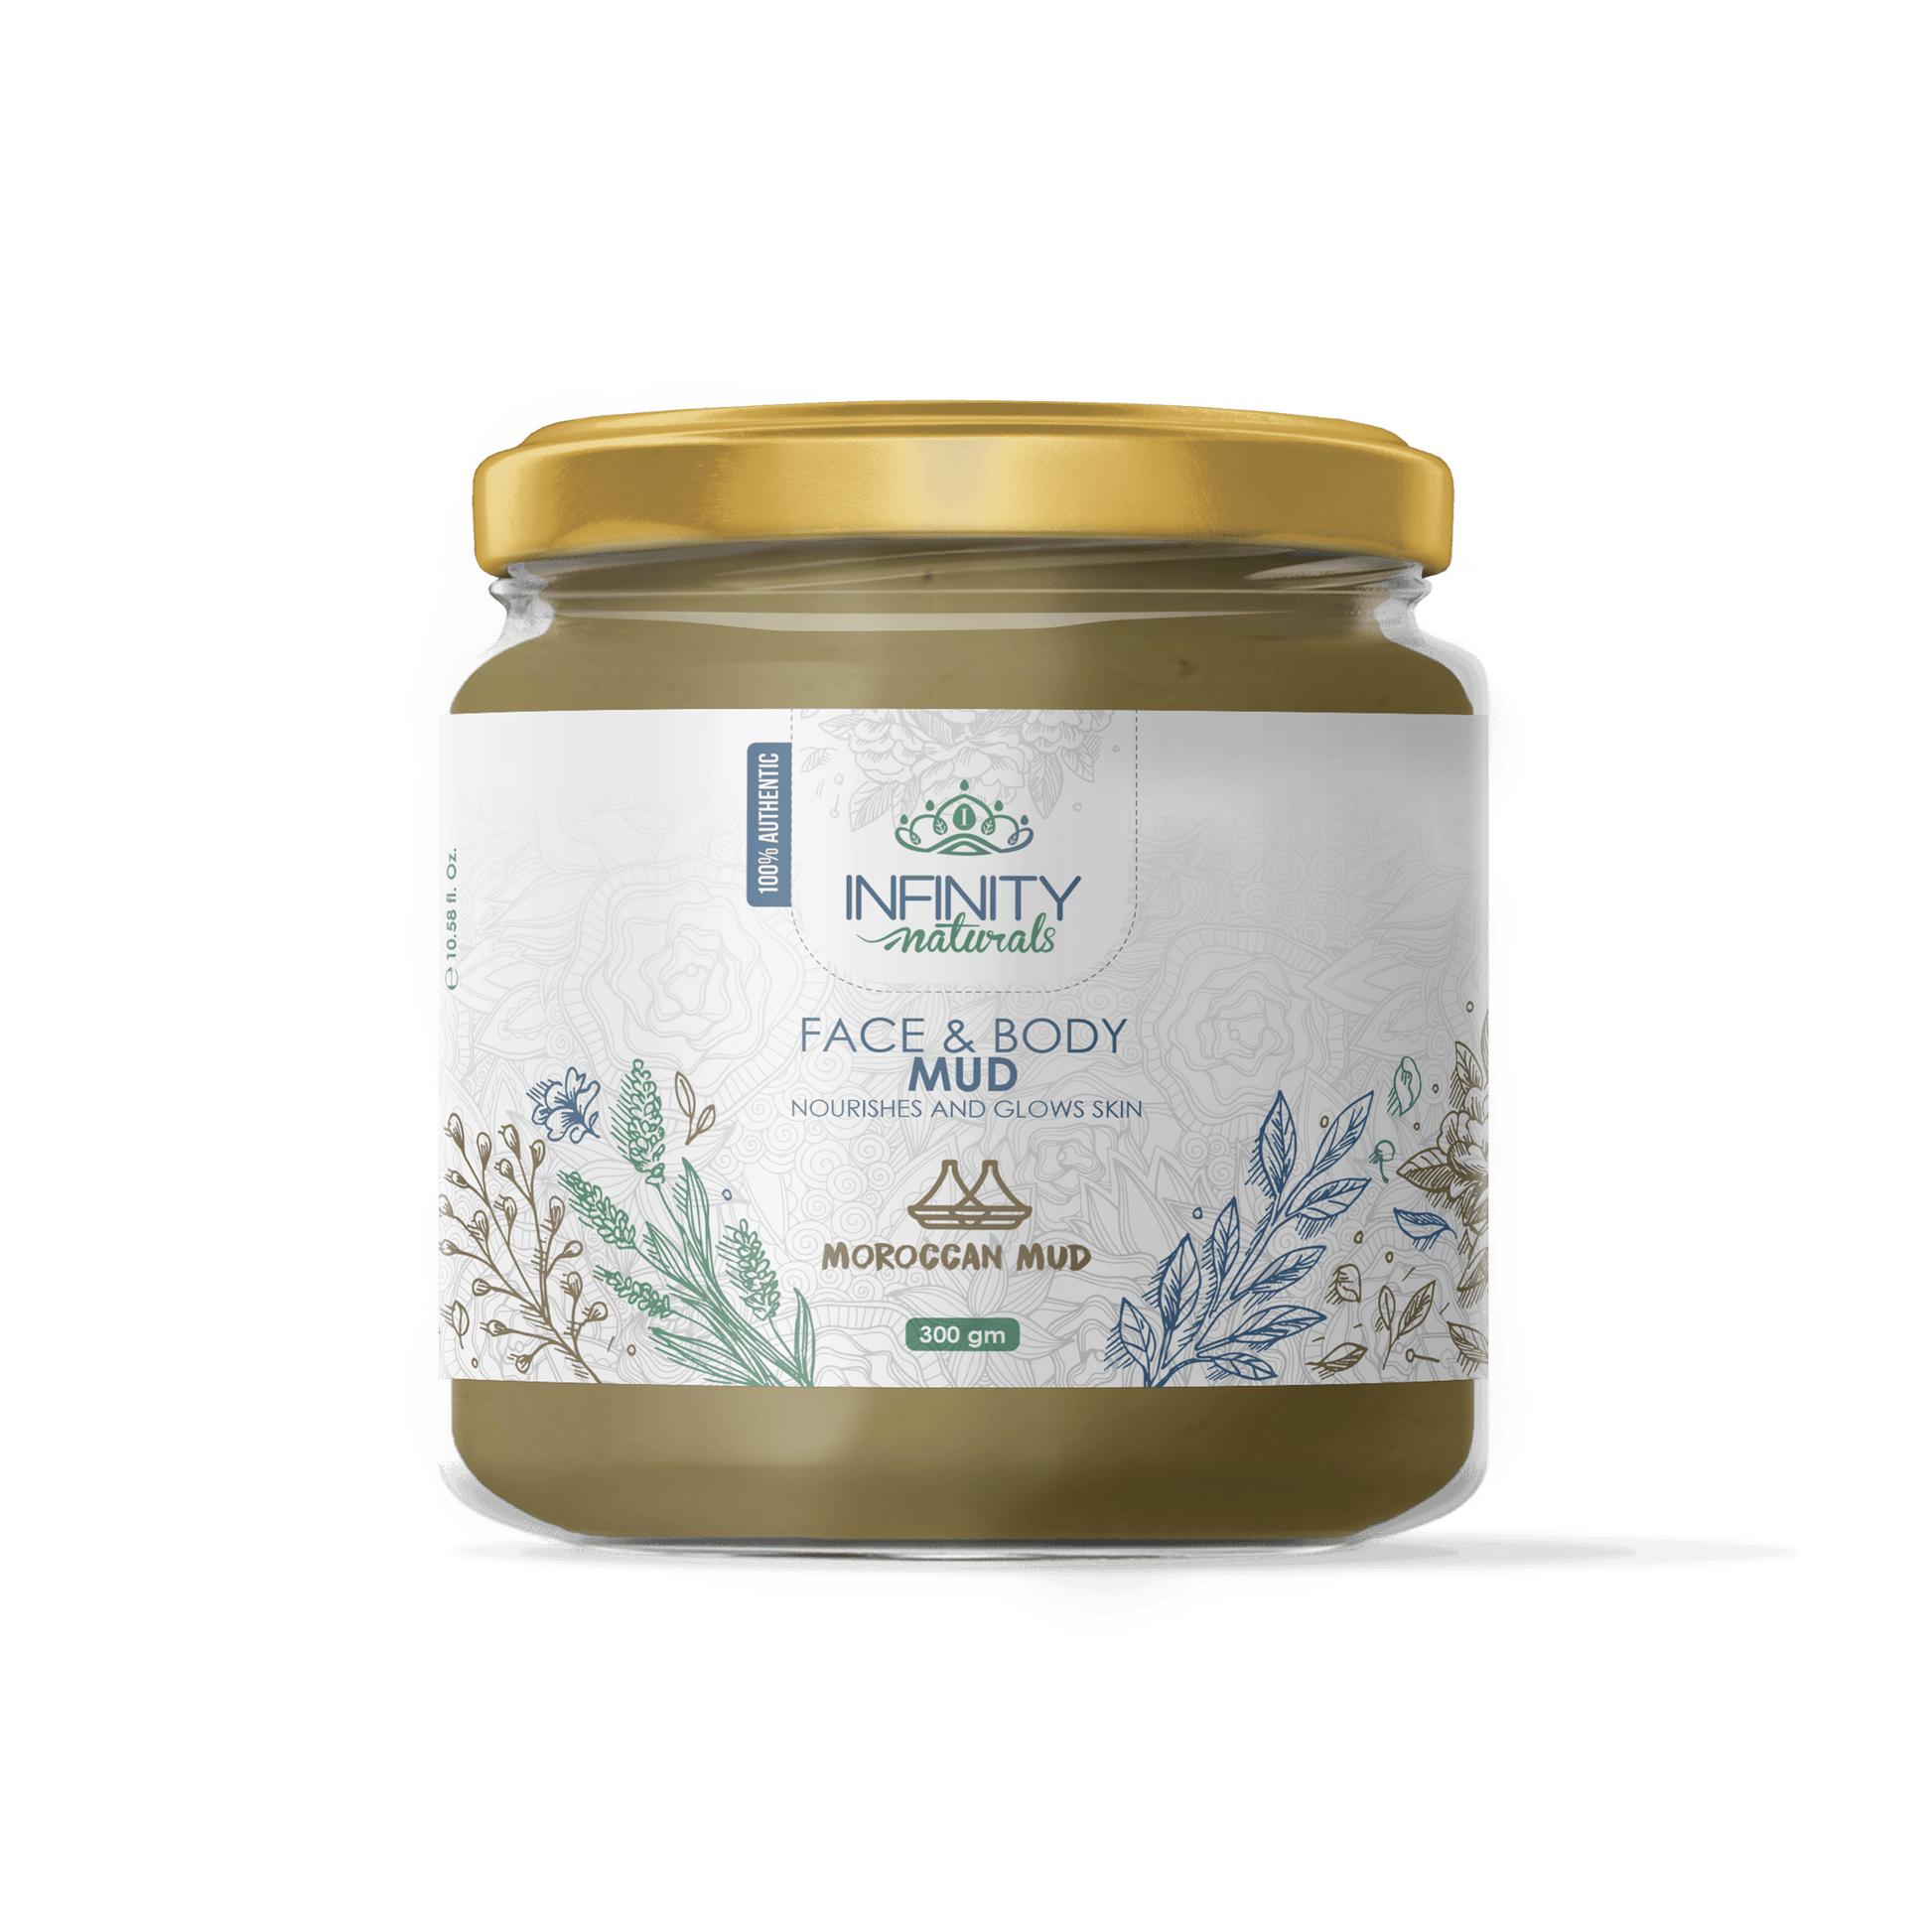 Infinity Naturals Moroccan Mud Face & Body - Beauty Bounty